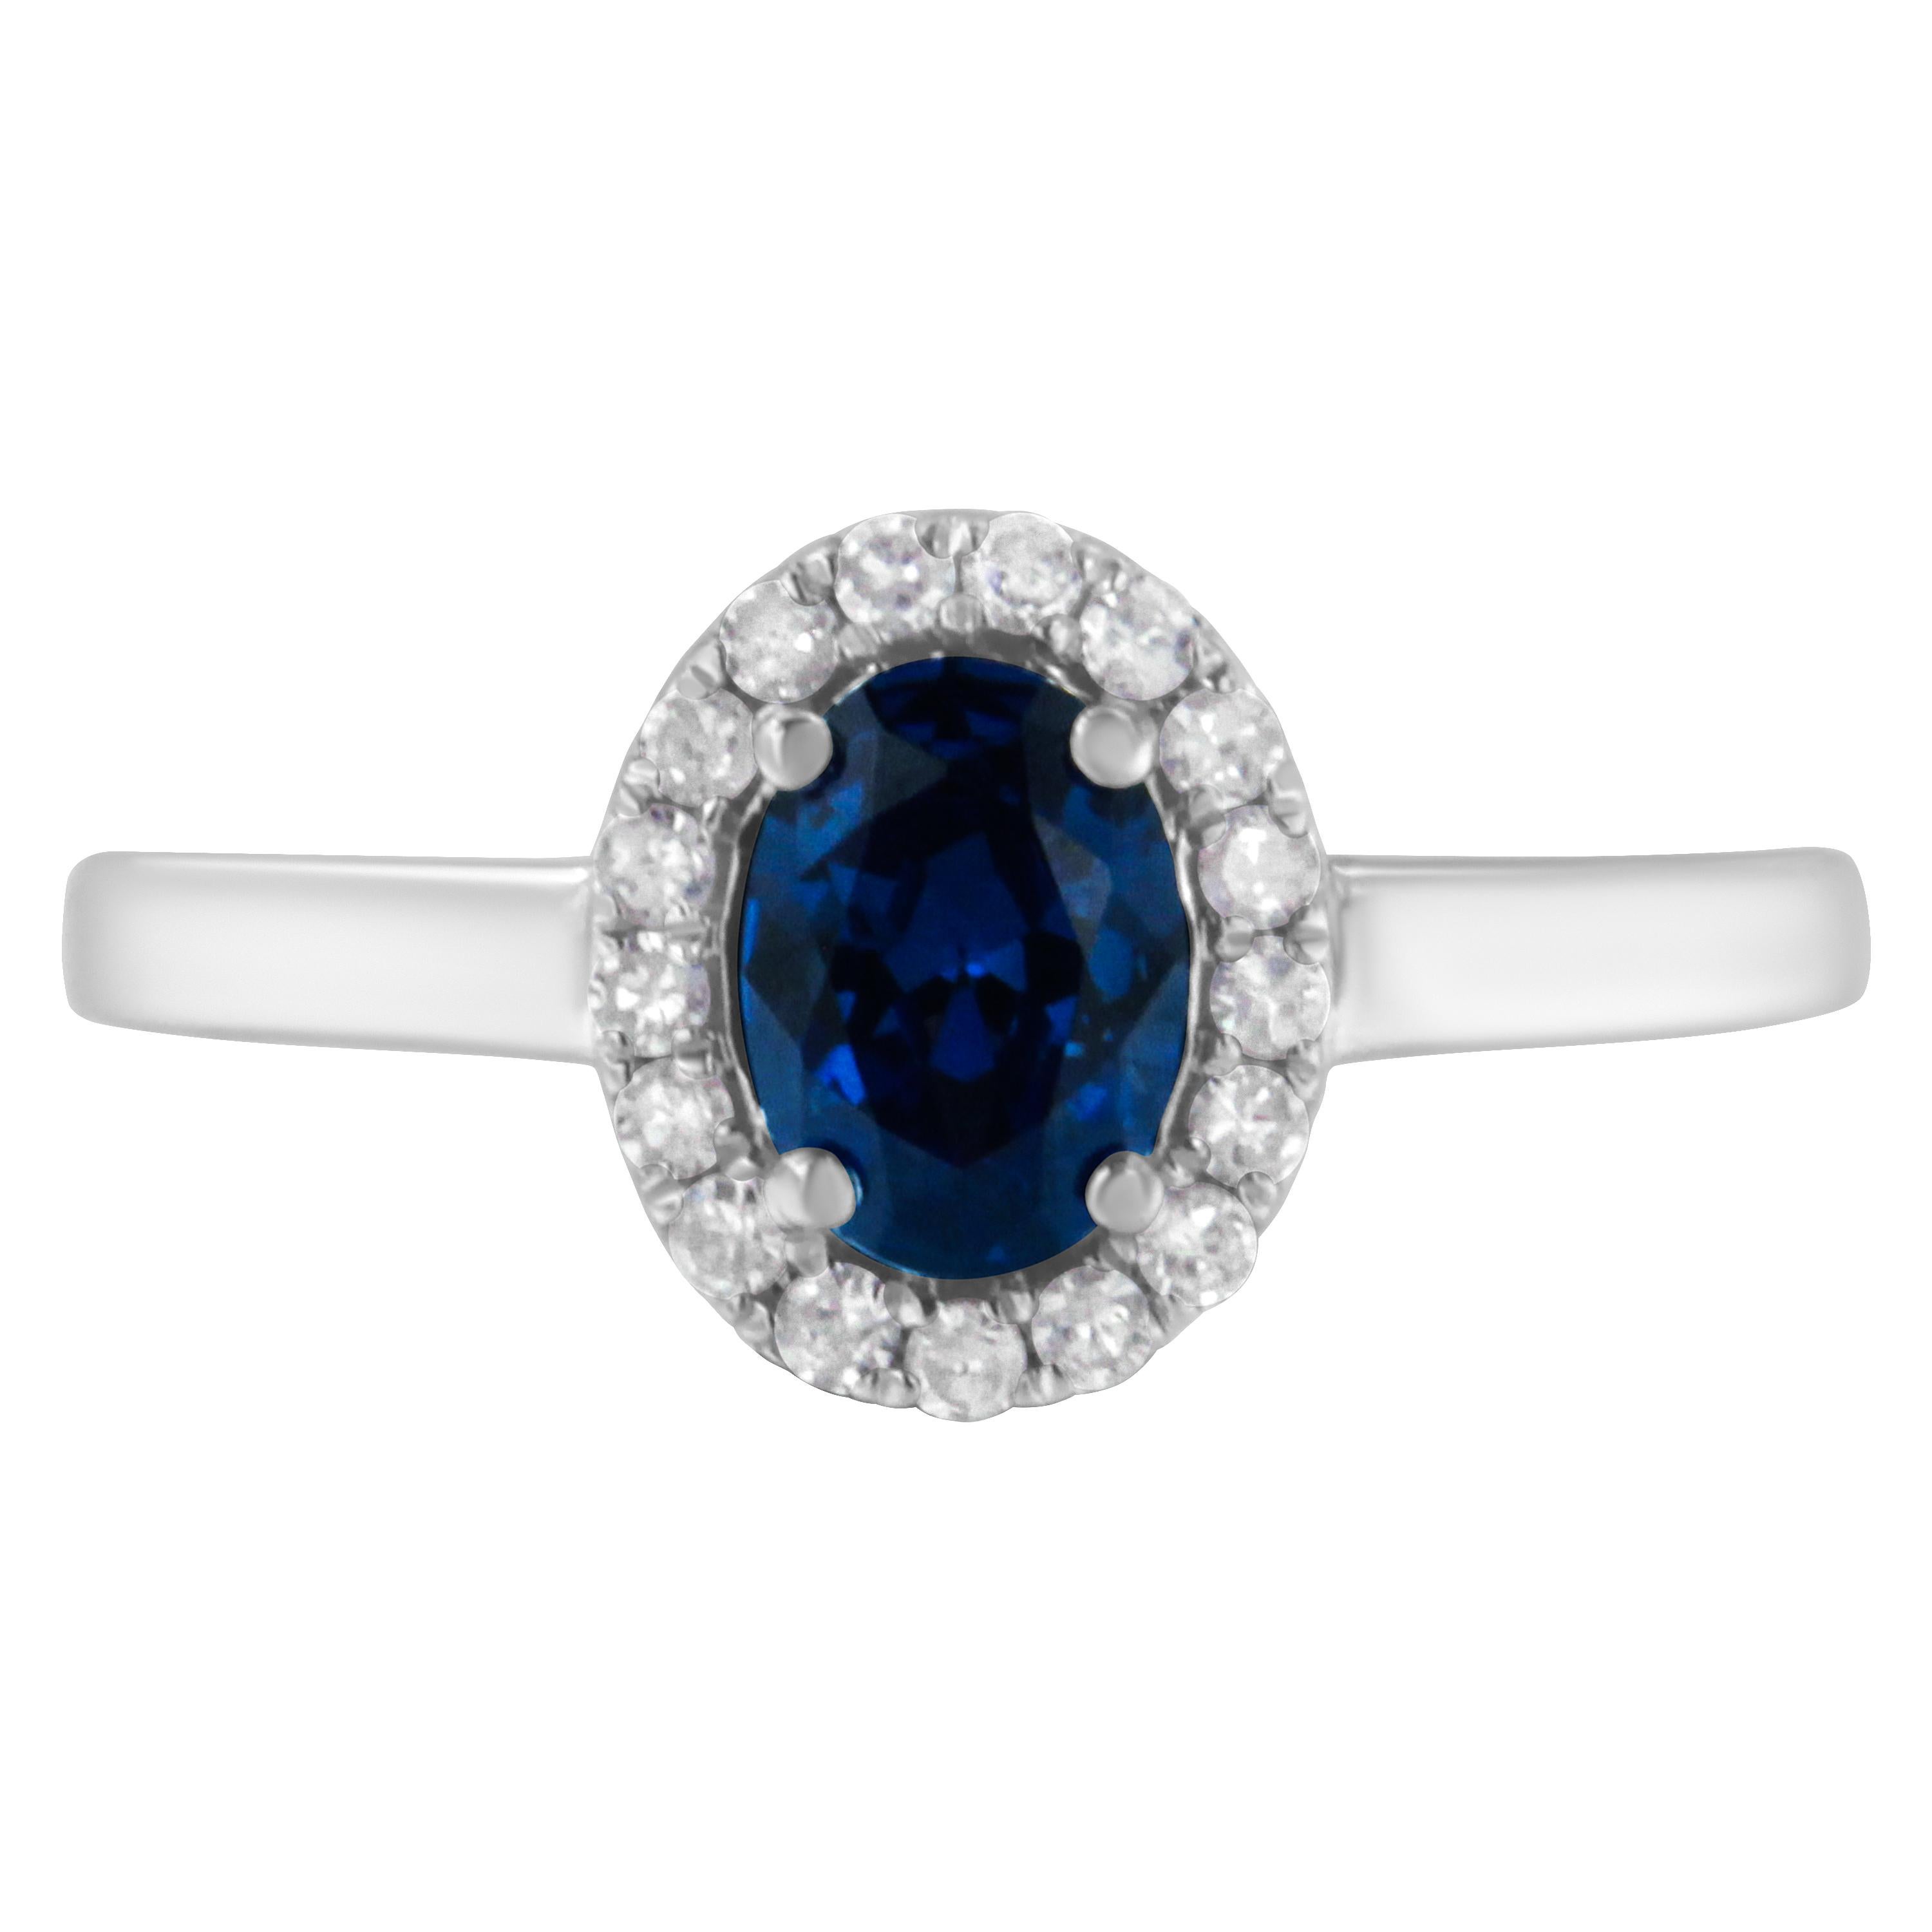 This dazzling 10k white gold ring features a 1 1/4ct deep blue oval sapphire. A brilliant halo of 1/5ct round cut diamonds frame the blue gemstone highlighting its natural glow.

Product Features: 

Diamond Type: Natural White Diamonds
Diamond